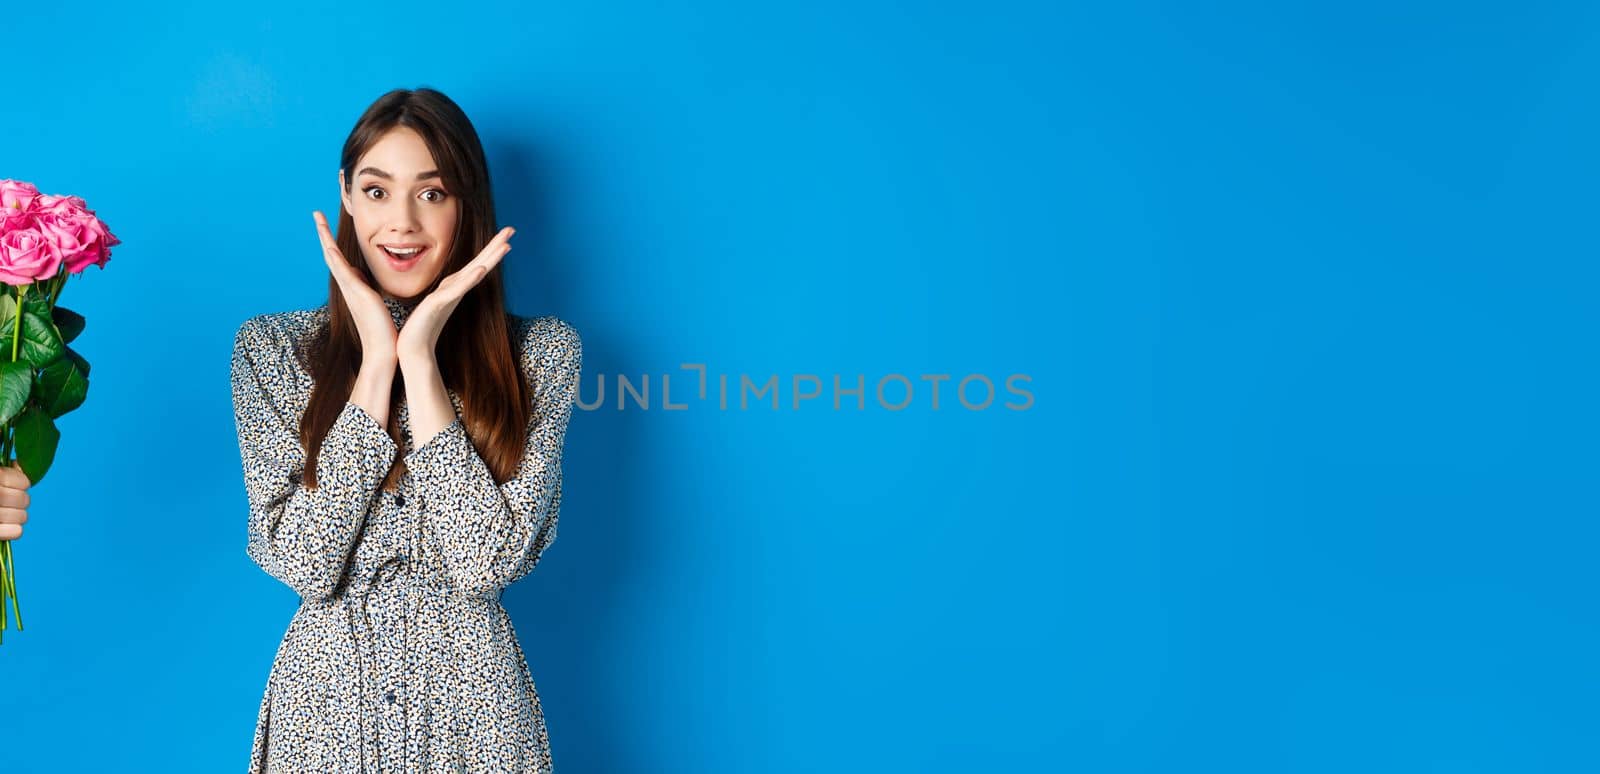 Valentines day concept. Excited and happy young woman looking amazed at camera while hand stretch out hand with bouquet of flowers, receiving romantic gift, blue background.